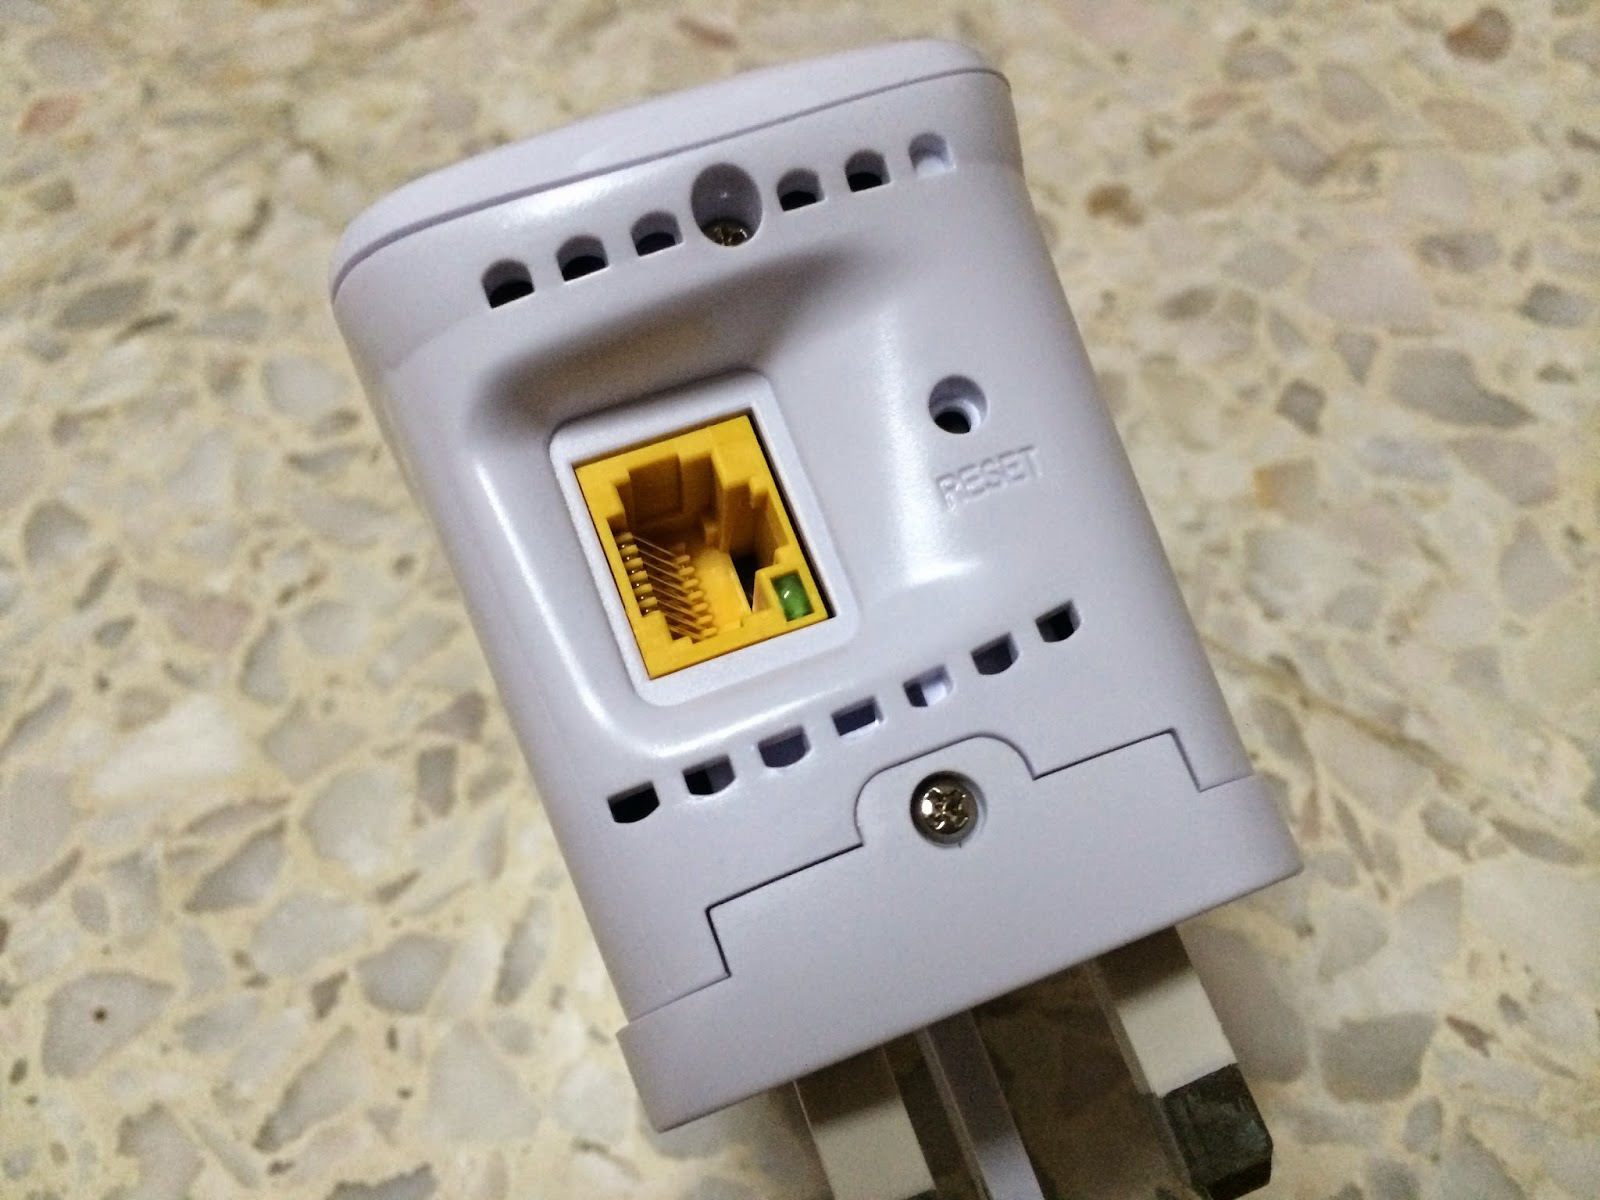 Unboxing & Review: Aztech WL580E Repeater 18